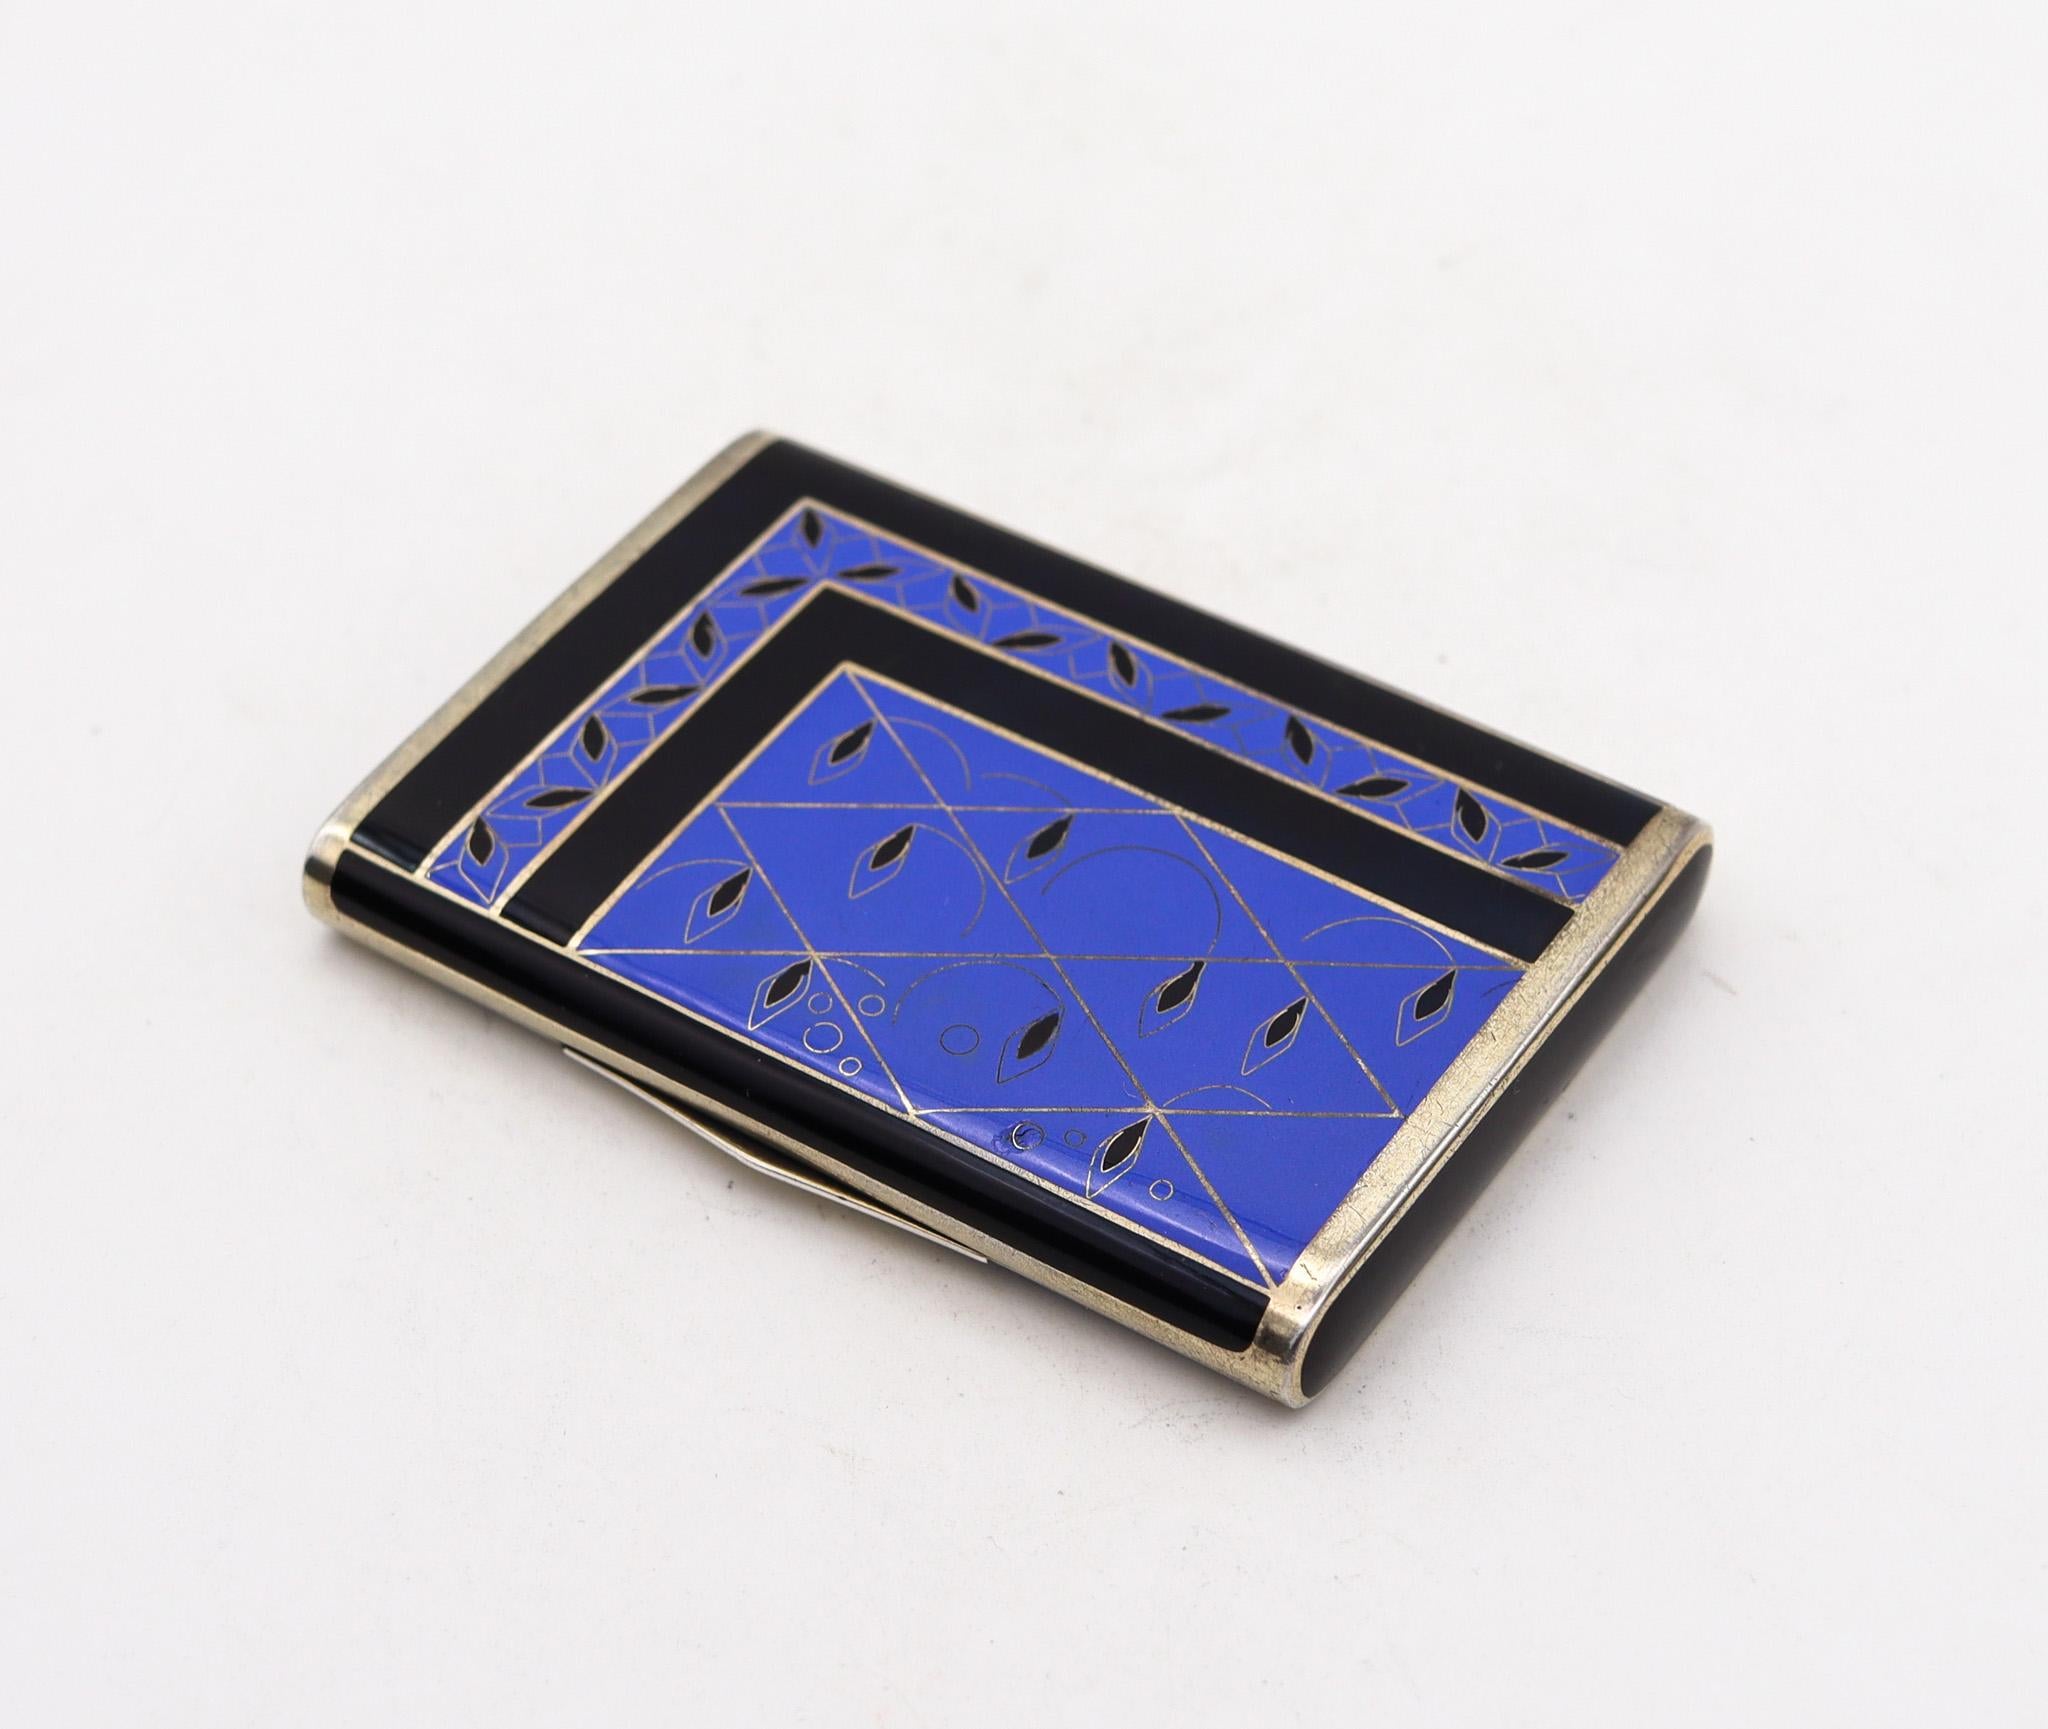 Cartier Paris 1930 By Louis Kuppenheim Art Deco Blue Enamel Box In .925 Sterling In Excellent Condition For Sale In Miami, FL